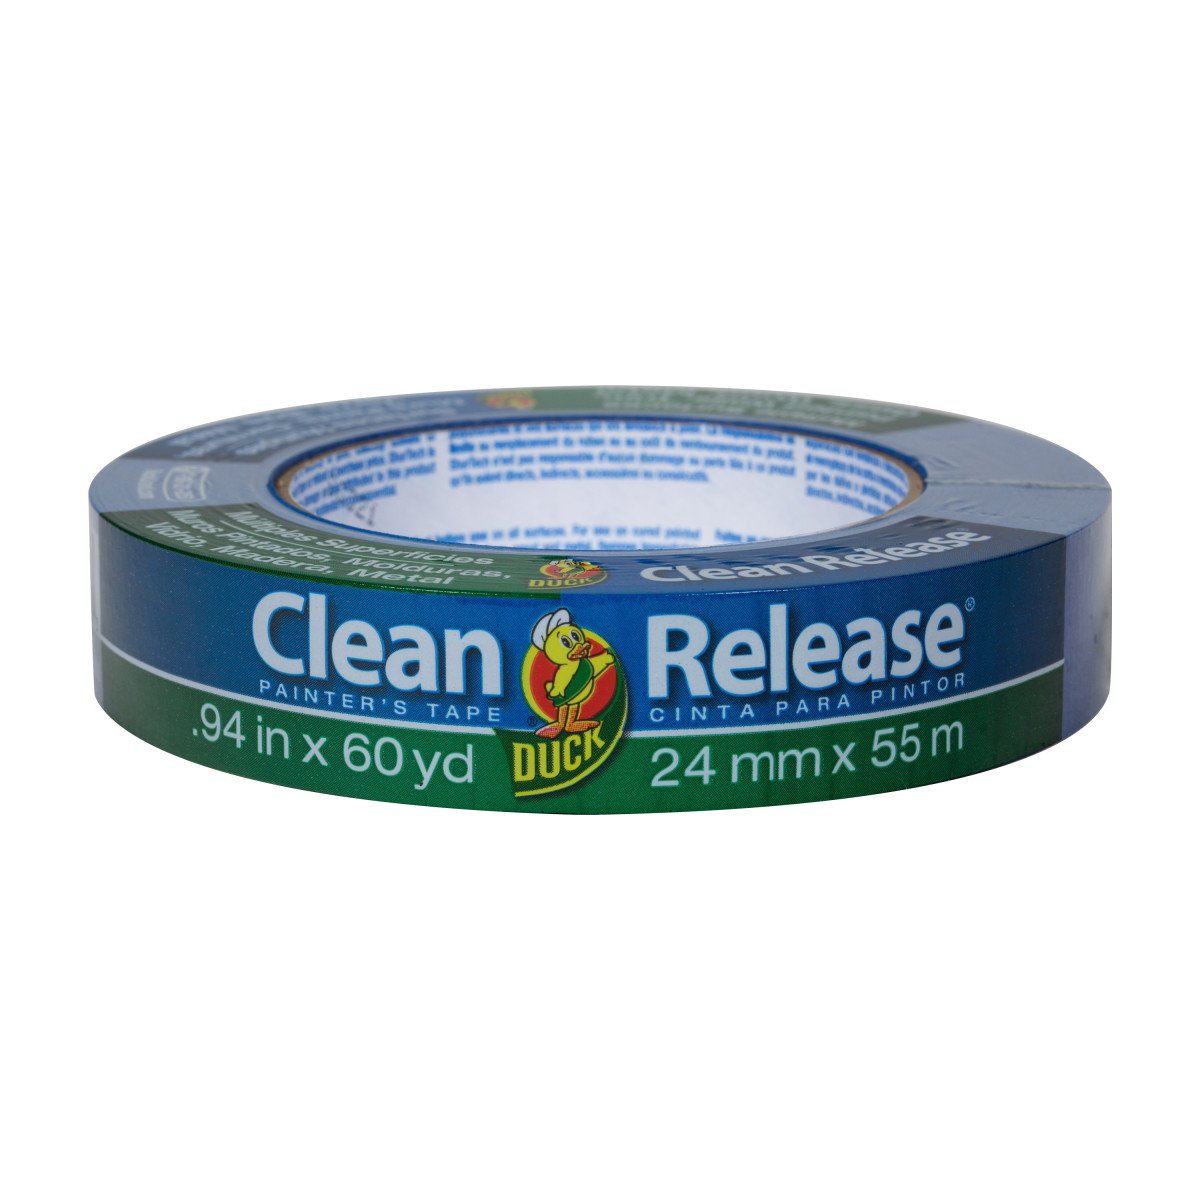 Duck Clean Release Blue Painter's Tape - Shop Adhesives & Tape at